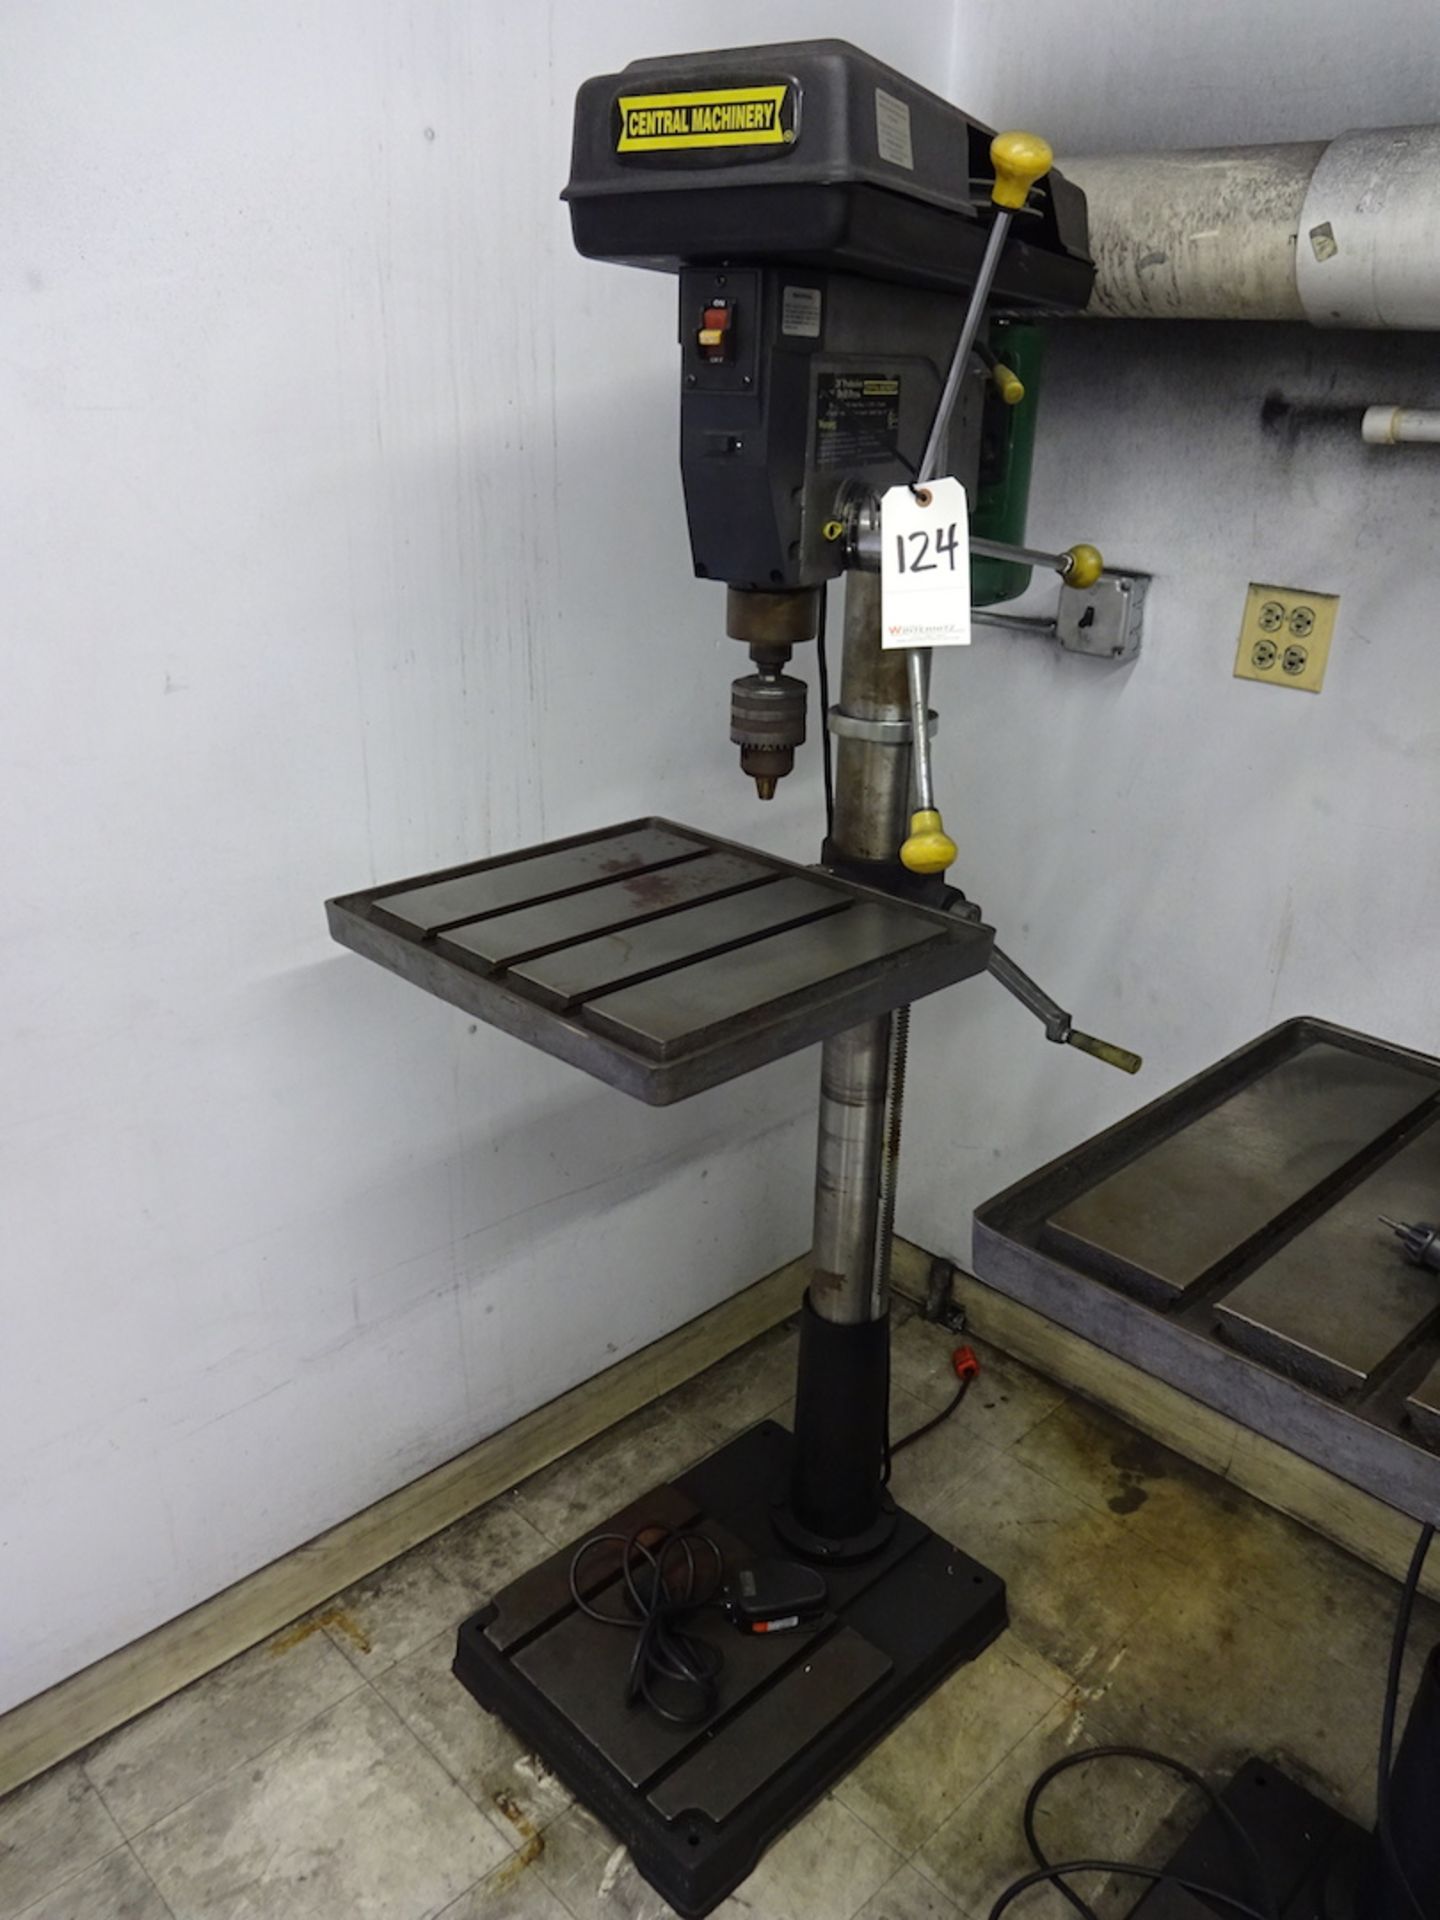 Central Machinery 20 in. Model 39955 Production Drill Press, S/N 0412080109, 16 in. x 14 in. T-